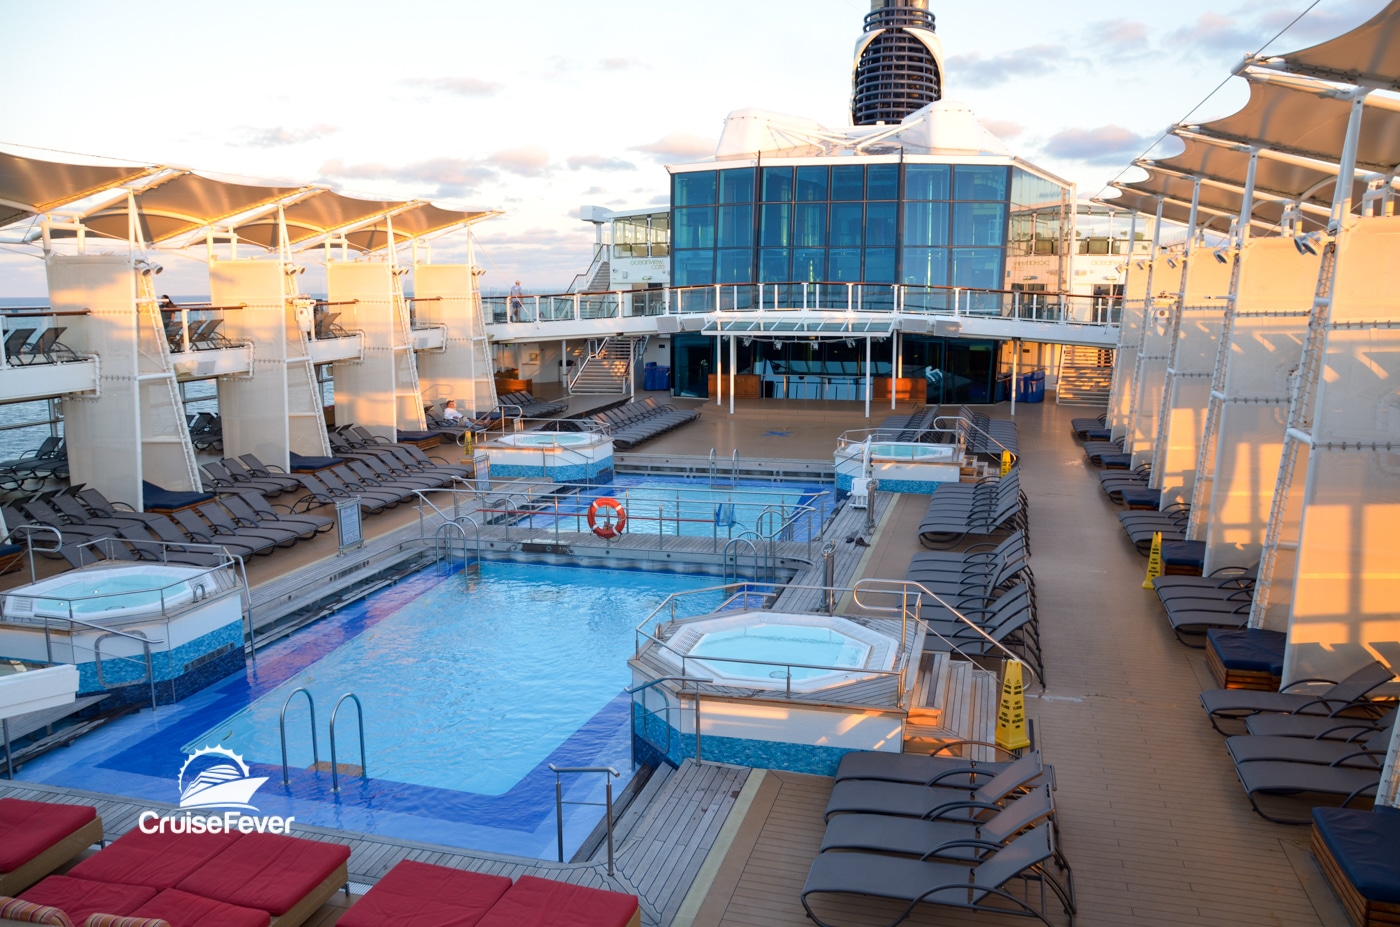 Cruise pool on Celebrity Silhouette